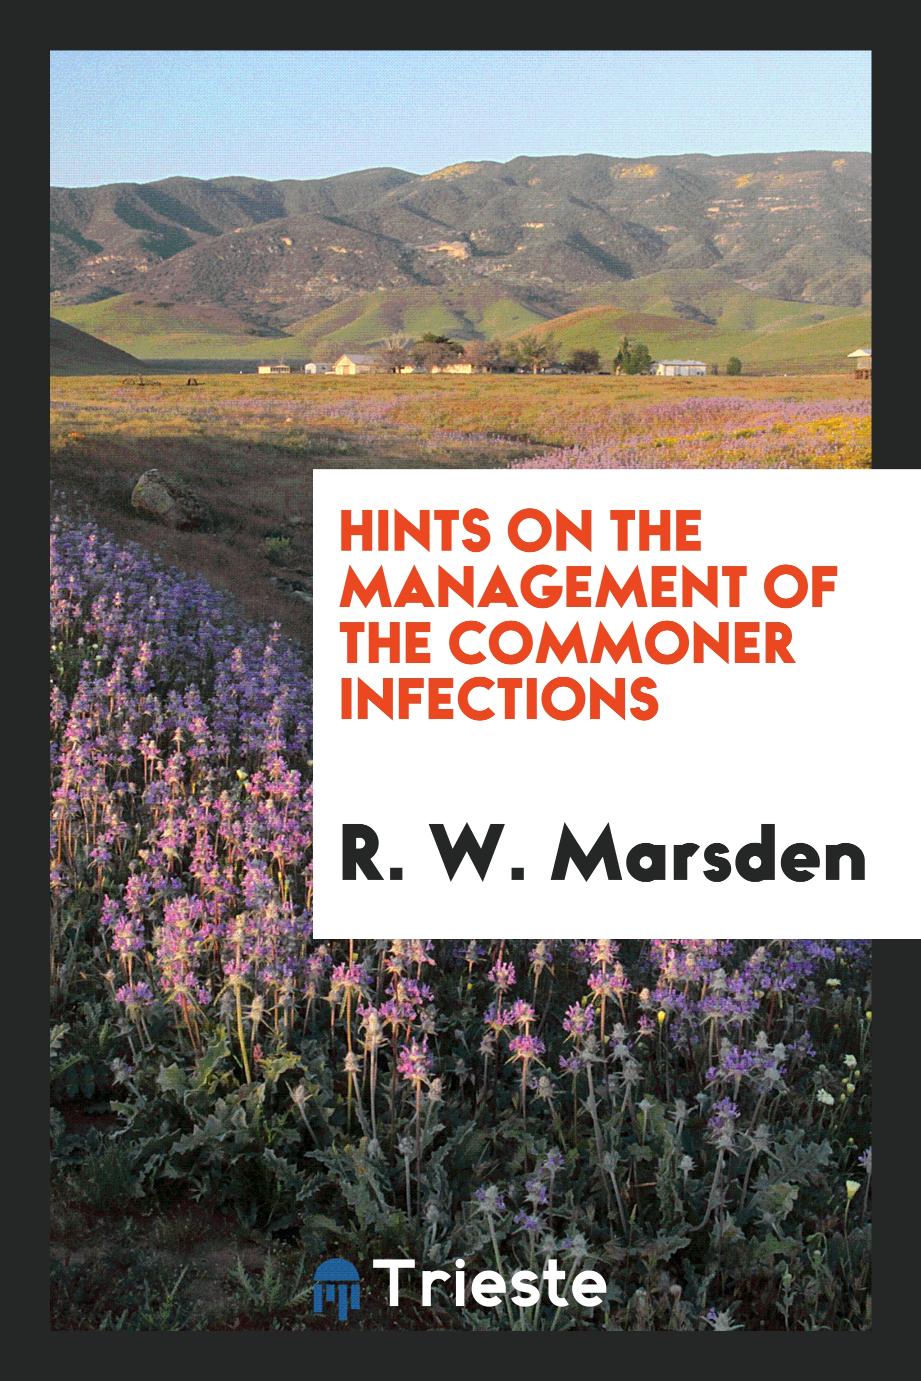 Hints on the Management of the Commoner Infections